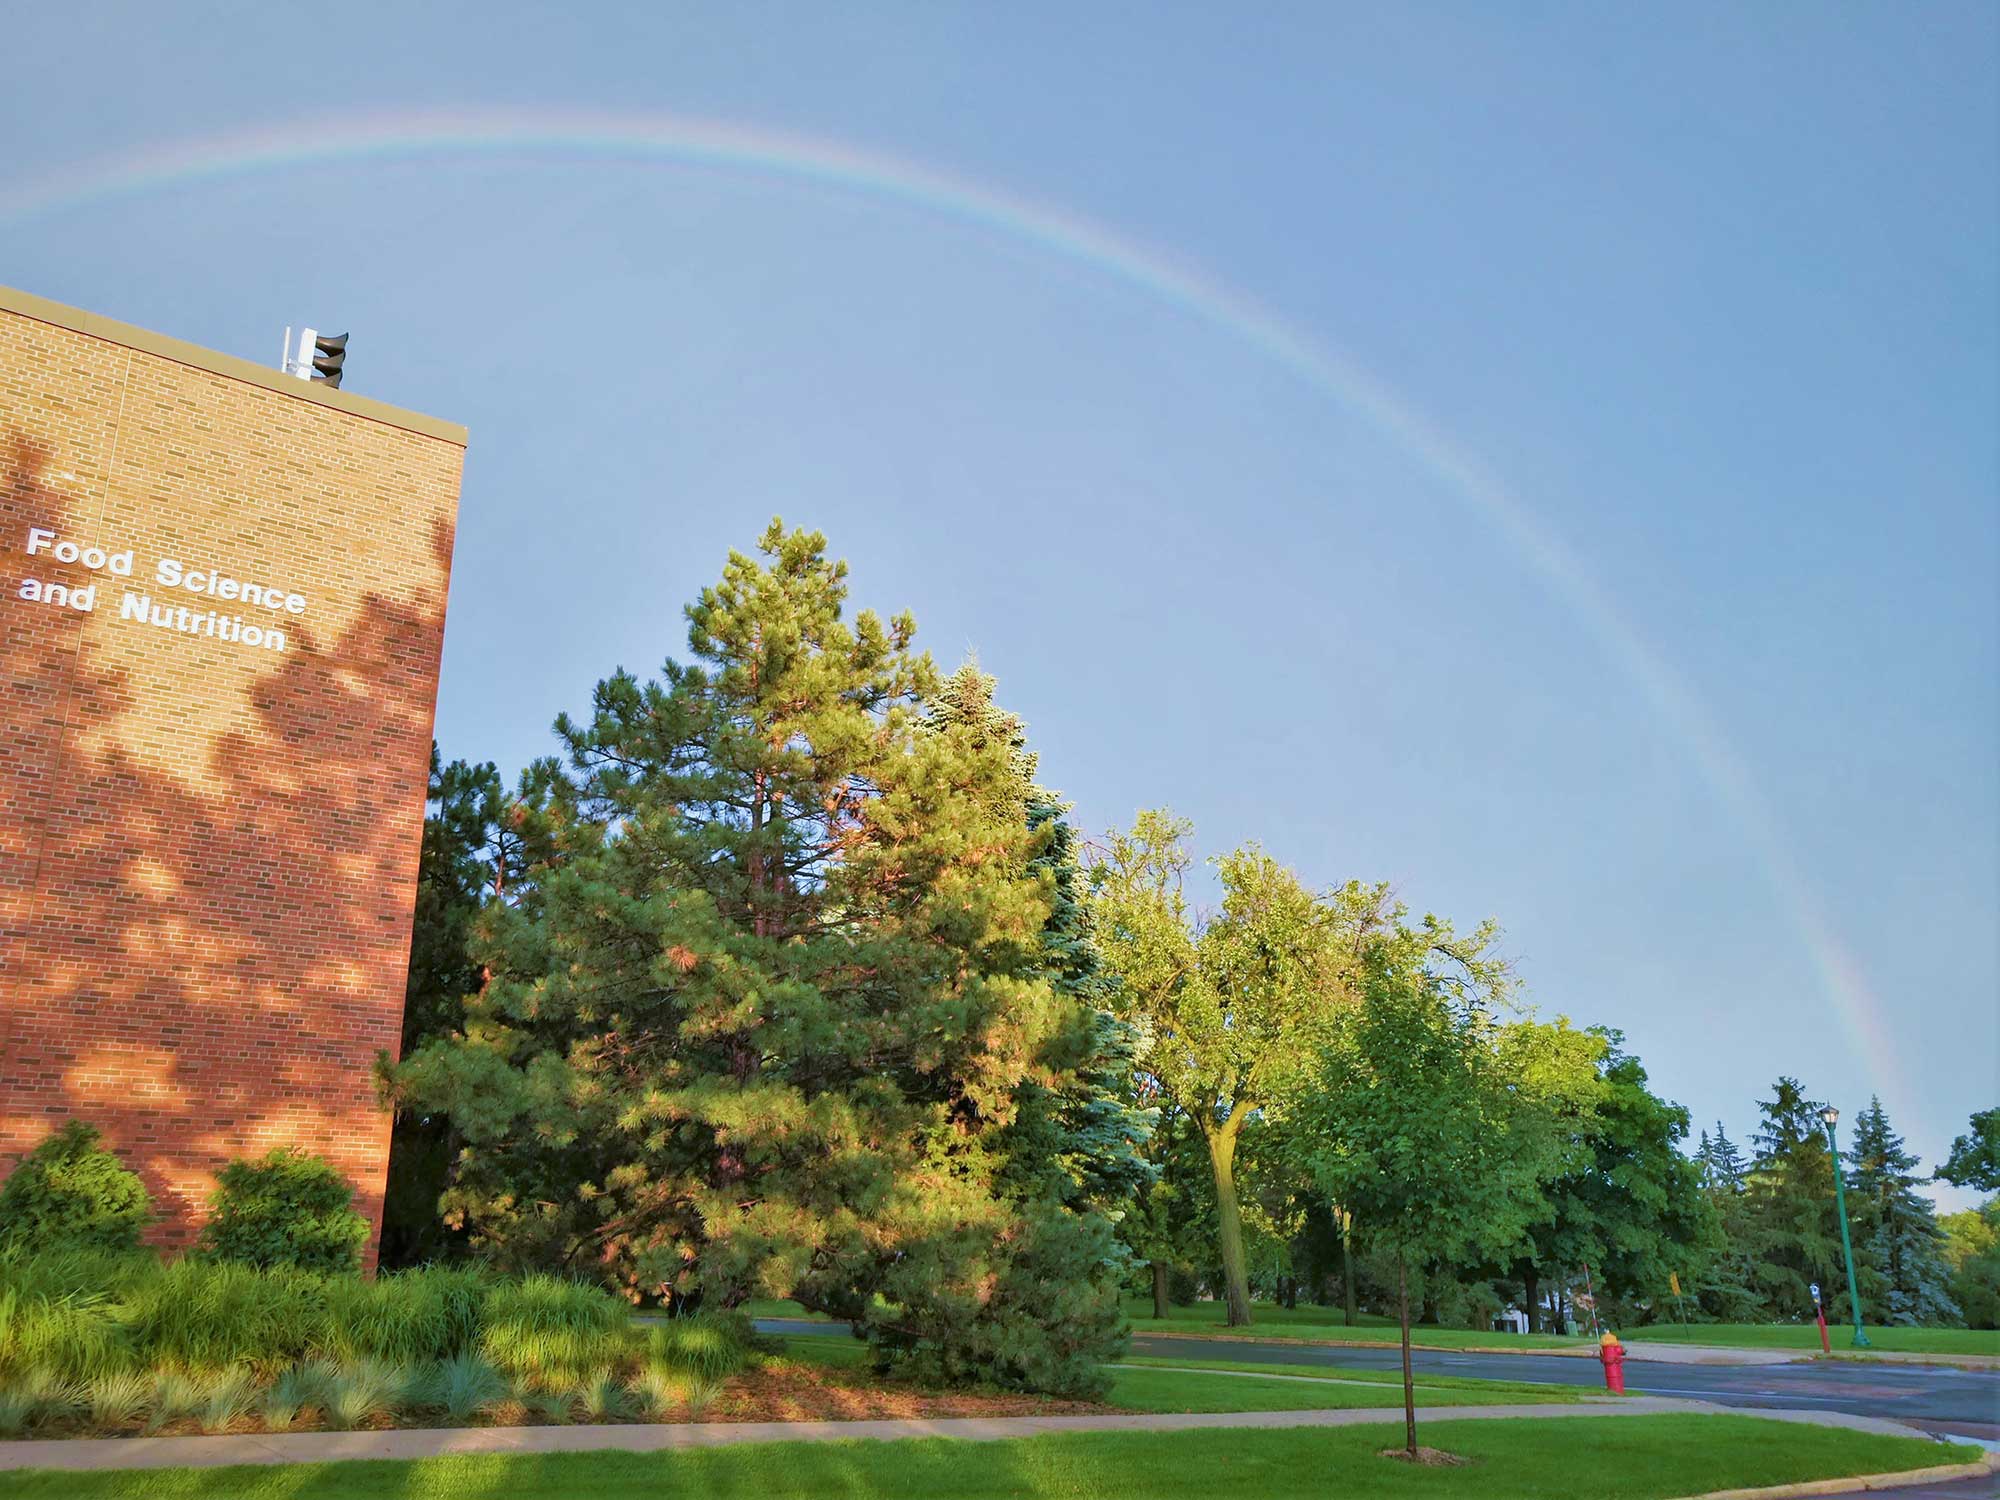 FSCN building with rainbow.